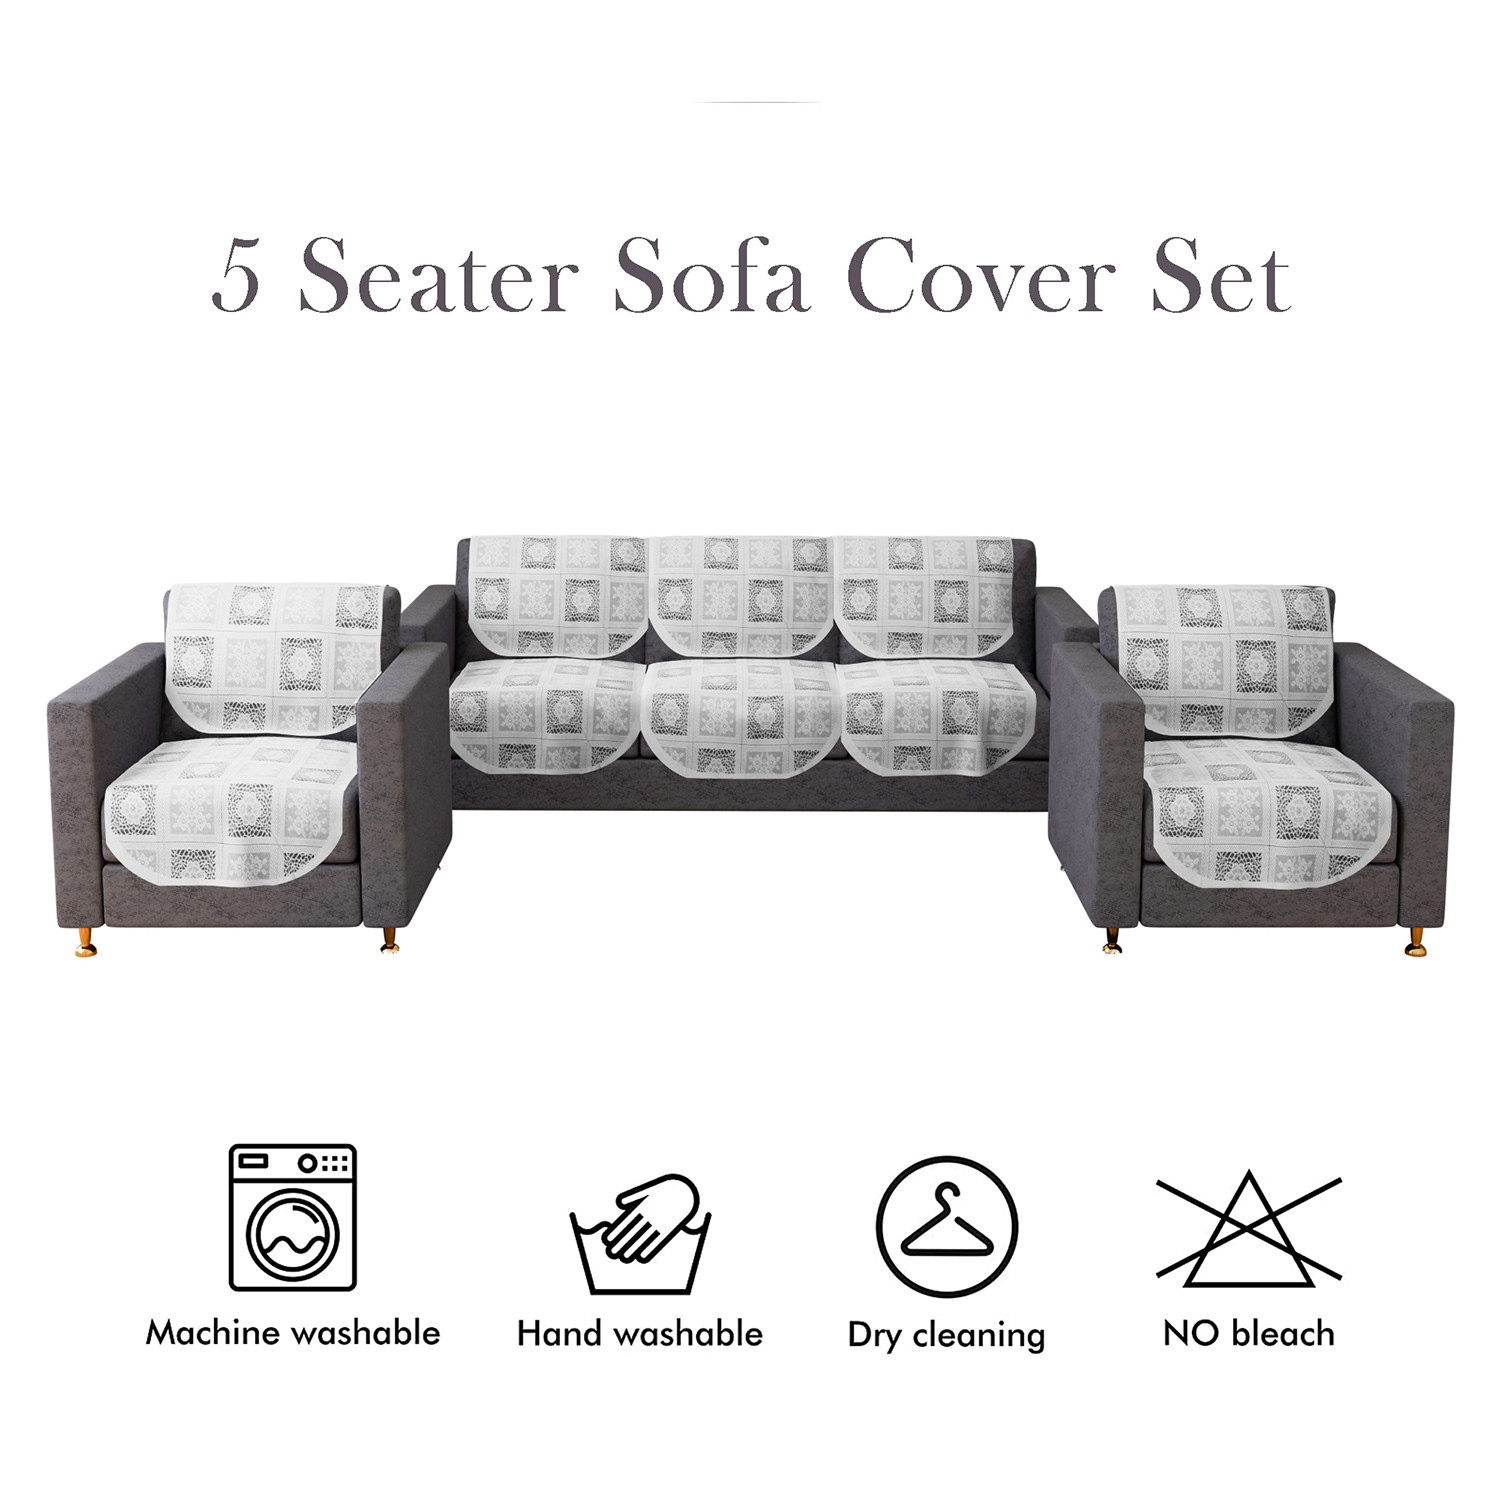 Kuber Industries Sofa Cover | Cotton Net Square Flower Sofa Cover | 5-Seater Sofa Cover for Home Decor | Sofa cover Set for Living room | White